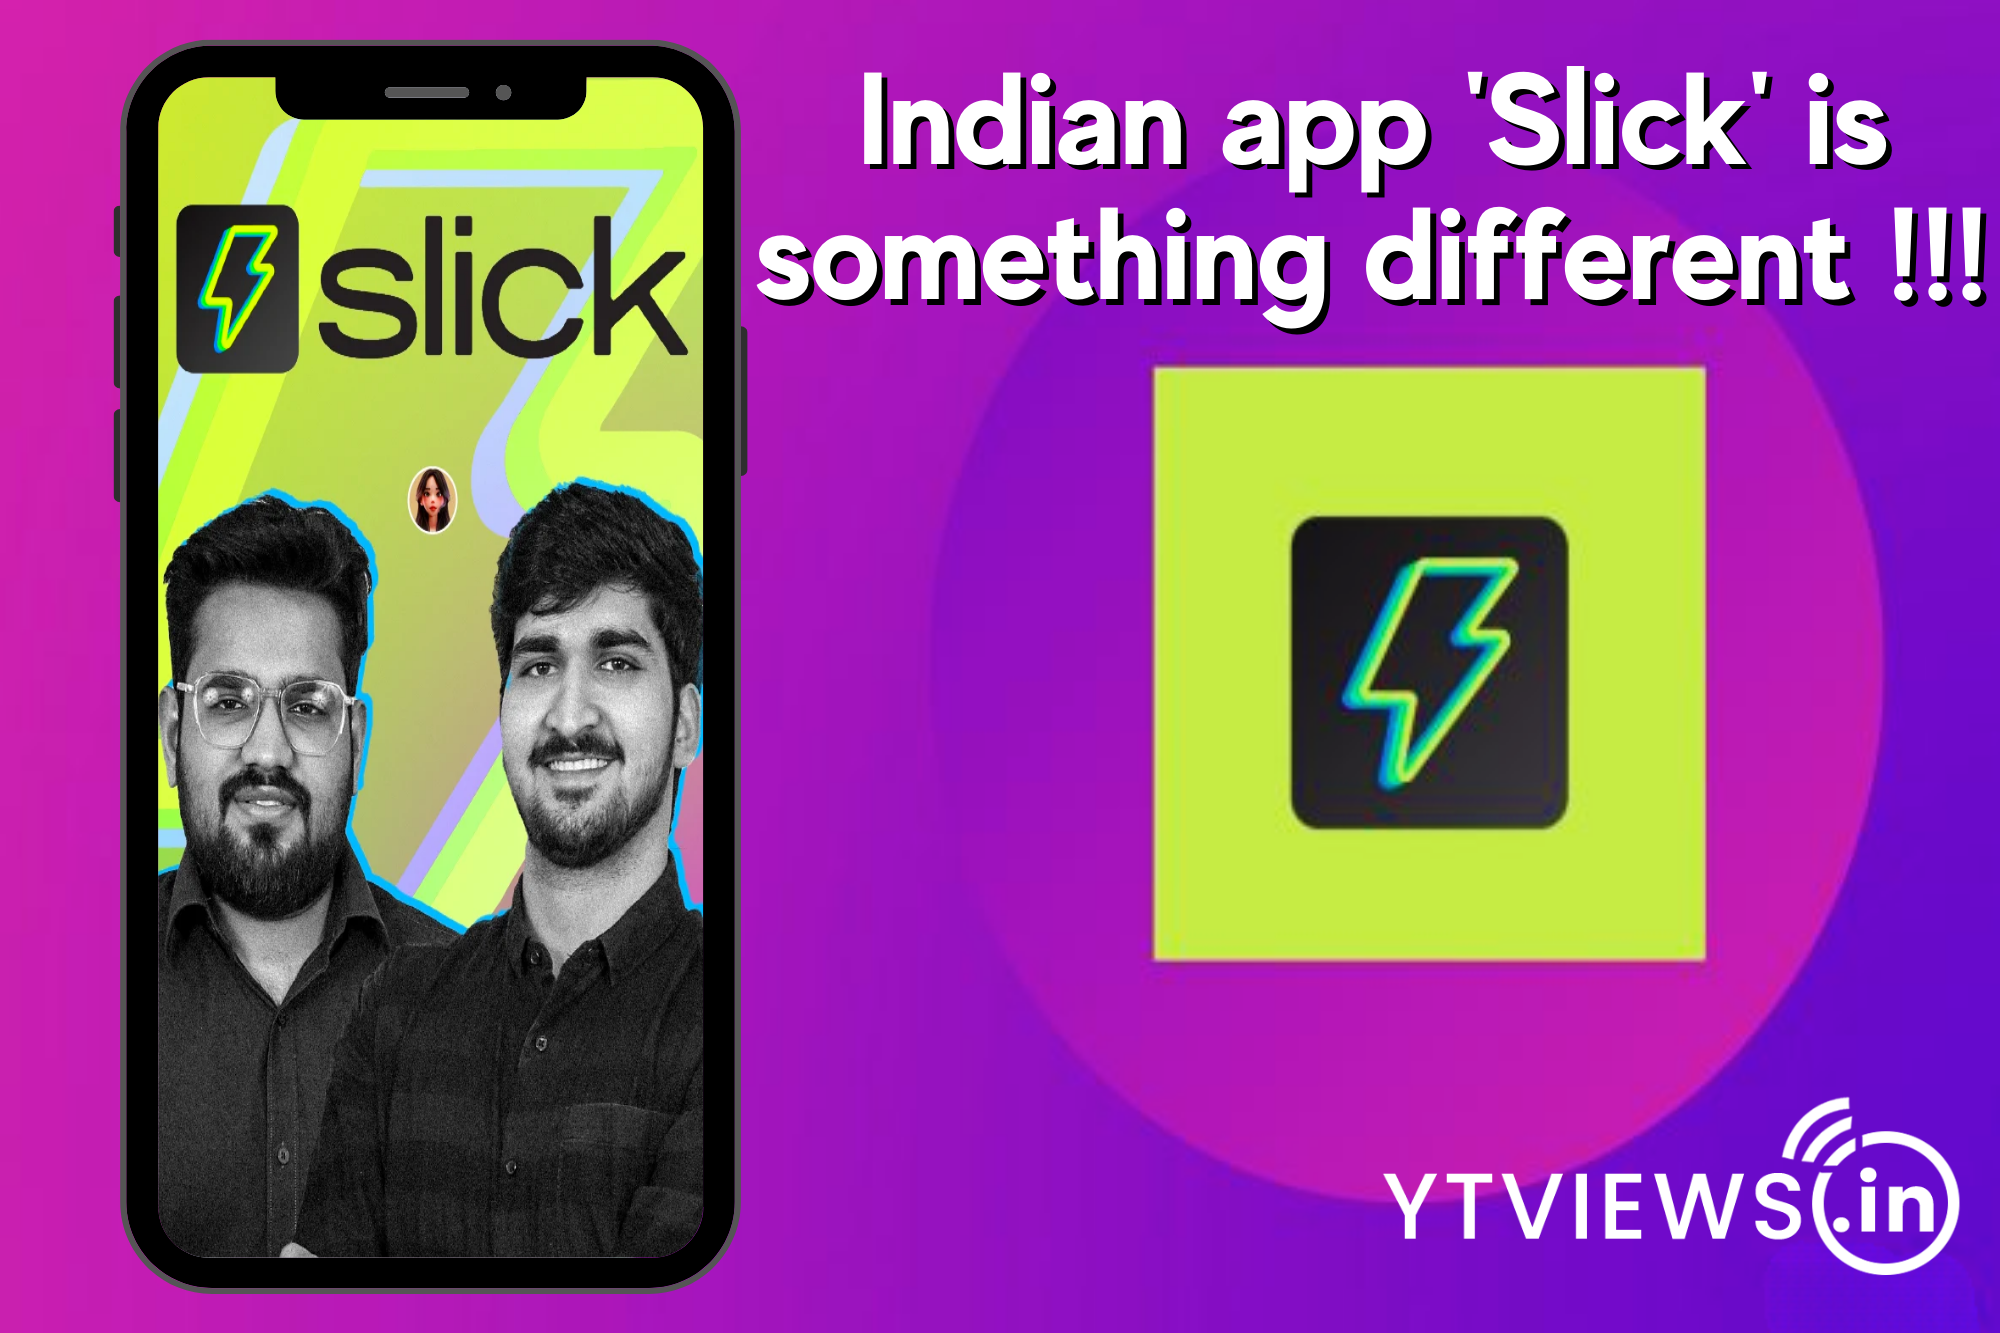 The all-new Indian social media platform ‘Slick’ has a unique way of working